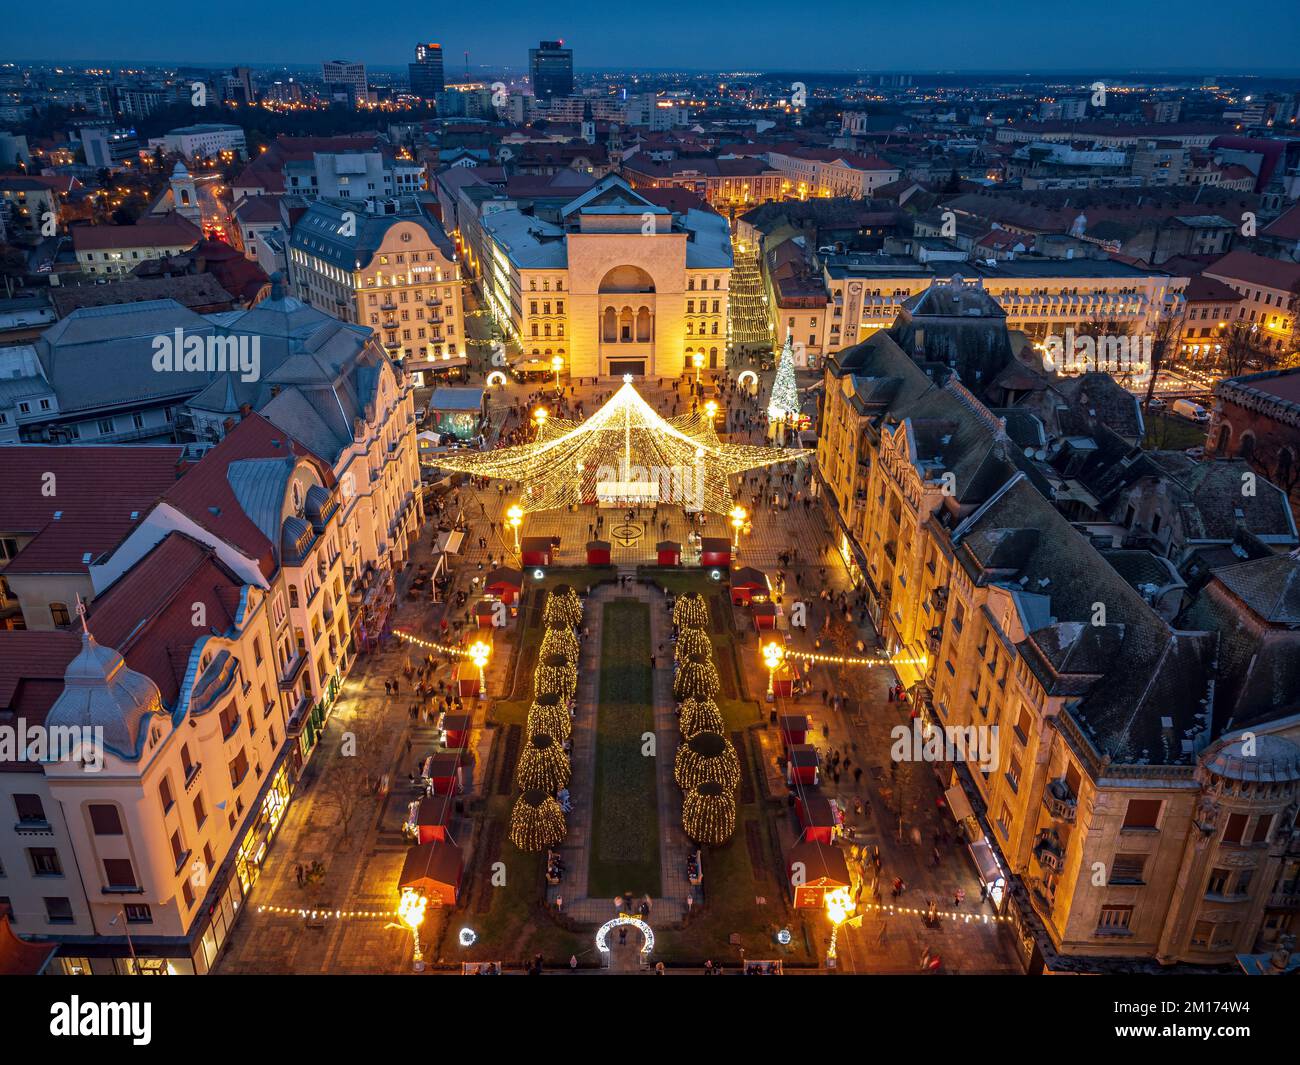 Aerial view of Timisoara’s lights and decorations for the Christmas Market. Photo taken on 10th of December 2022 in Timisoara, Timis county, Romania. Stock Photo